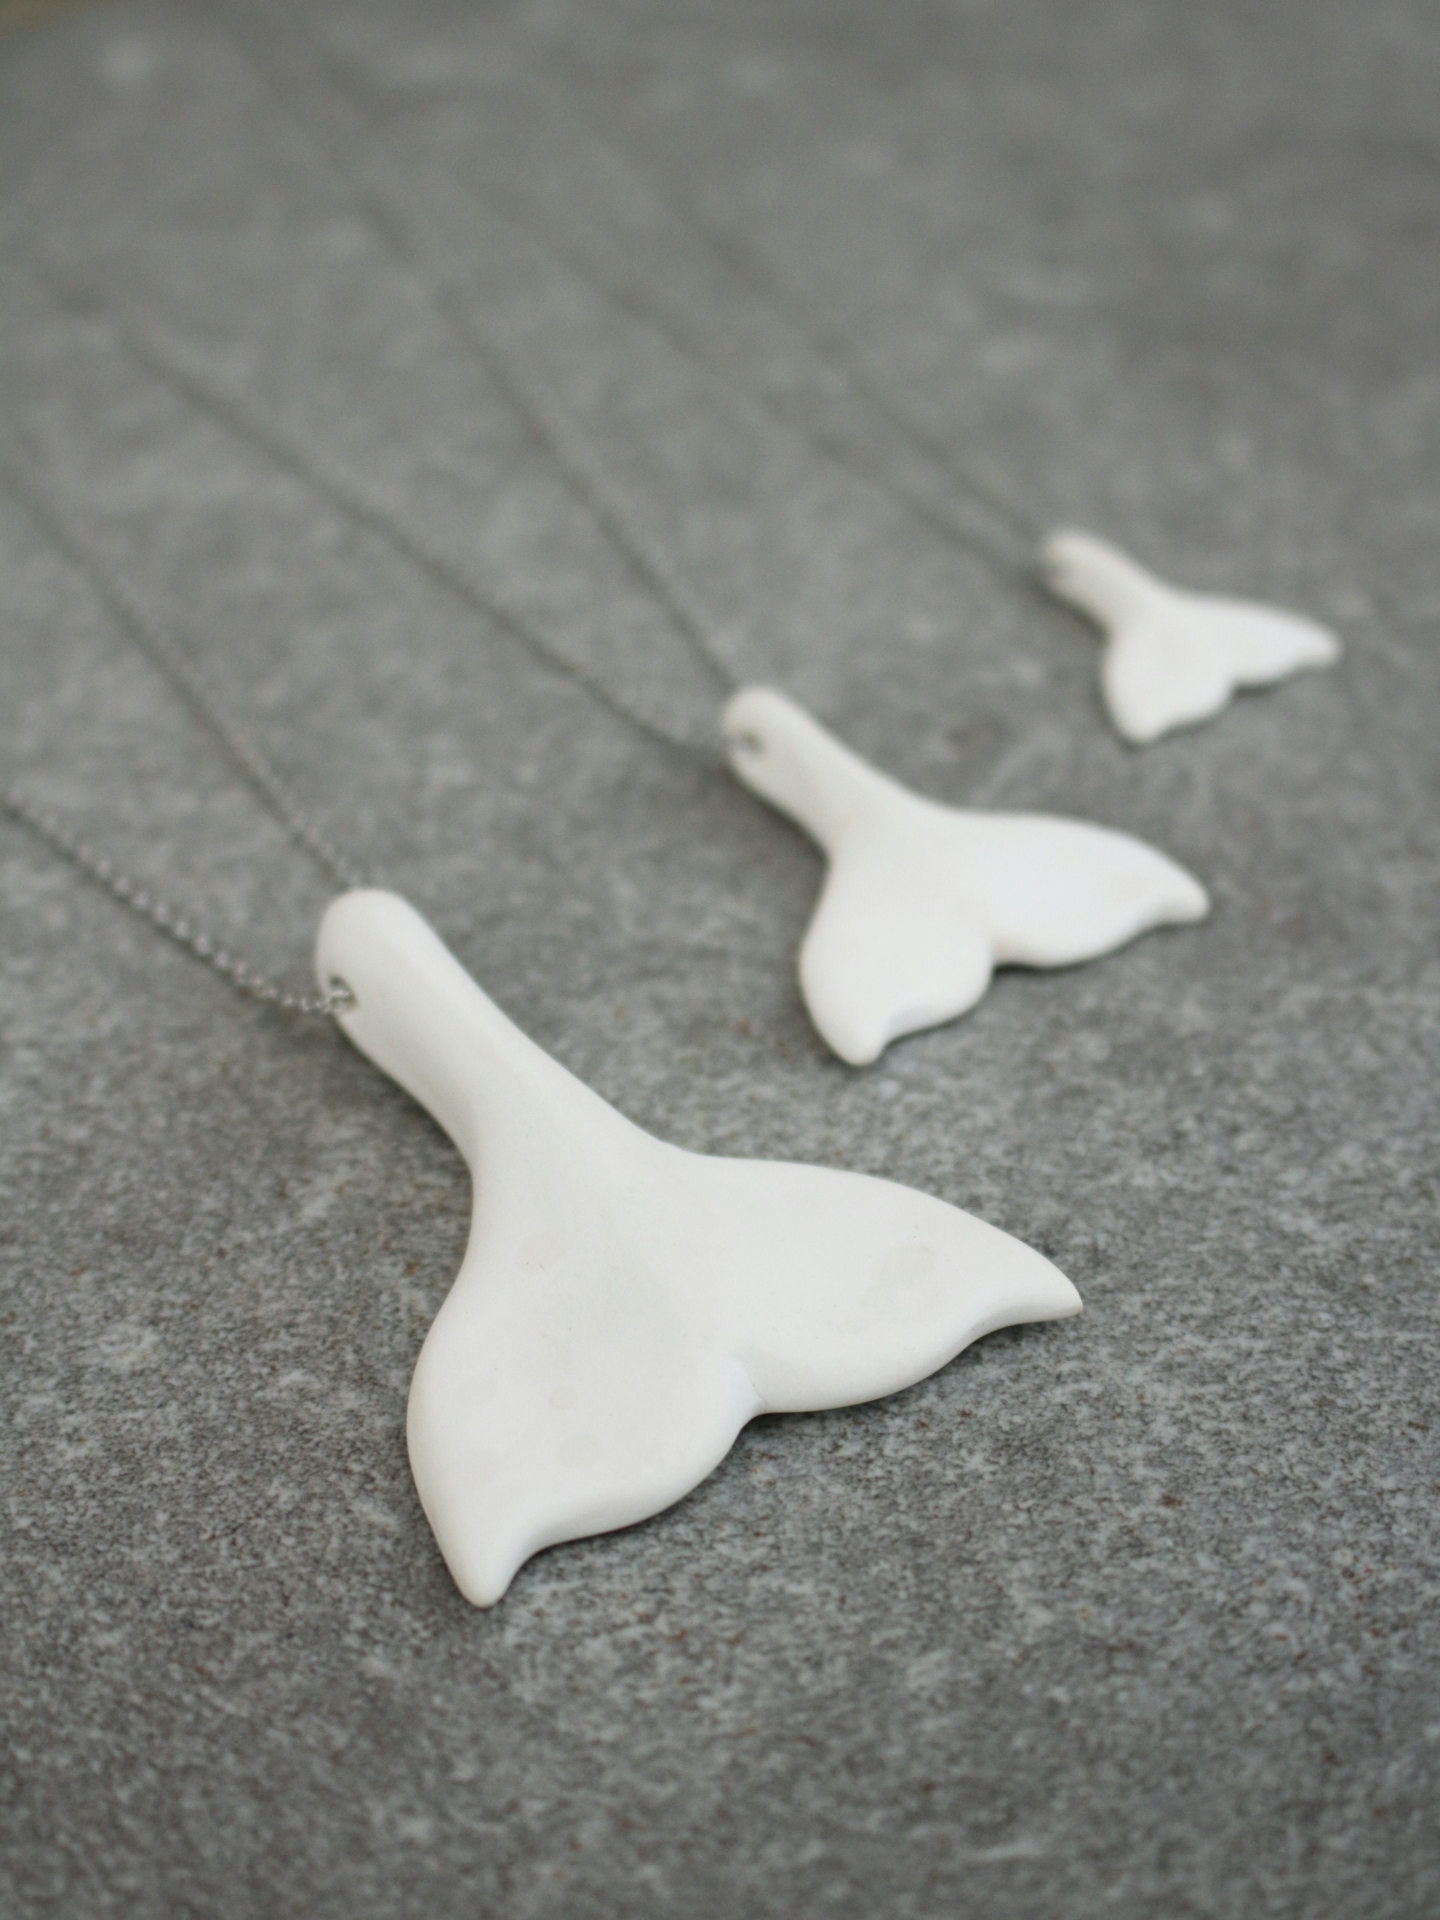 Whale fluke necklaces, hand made out of porcelain.